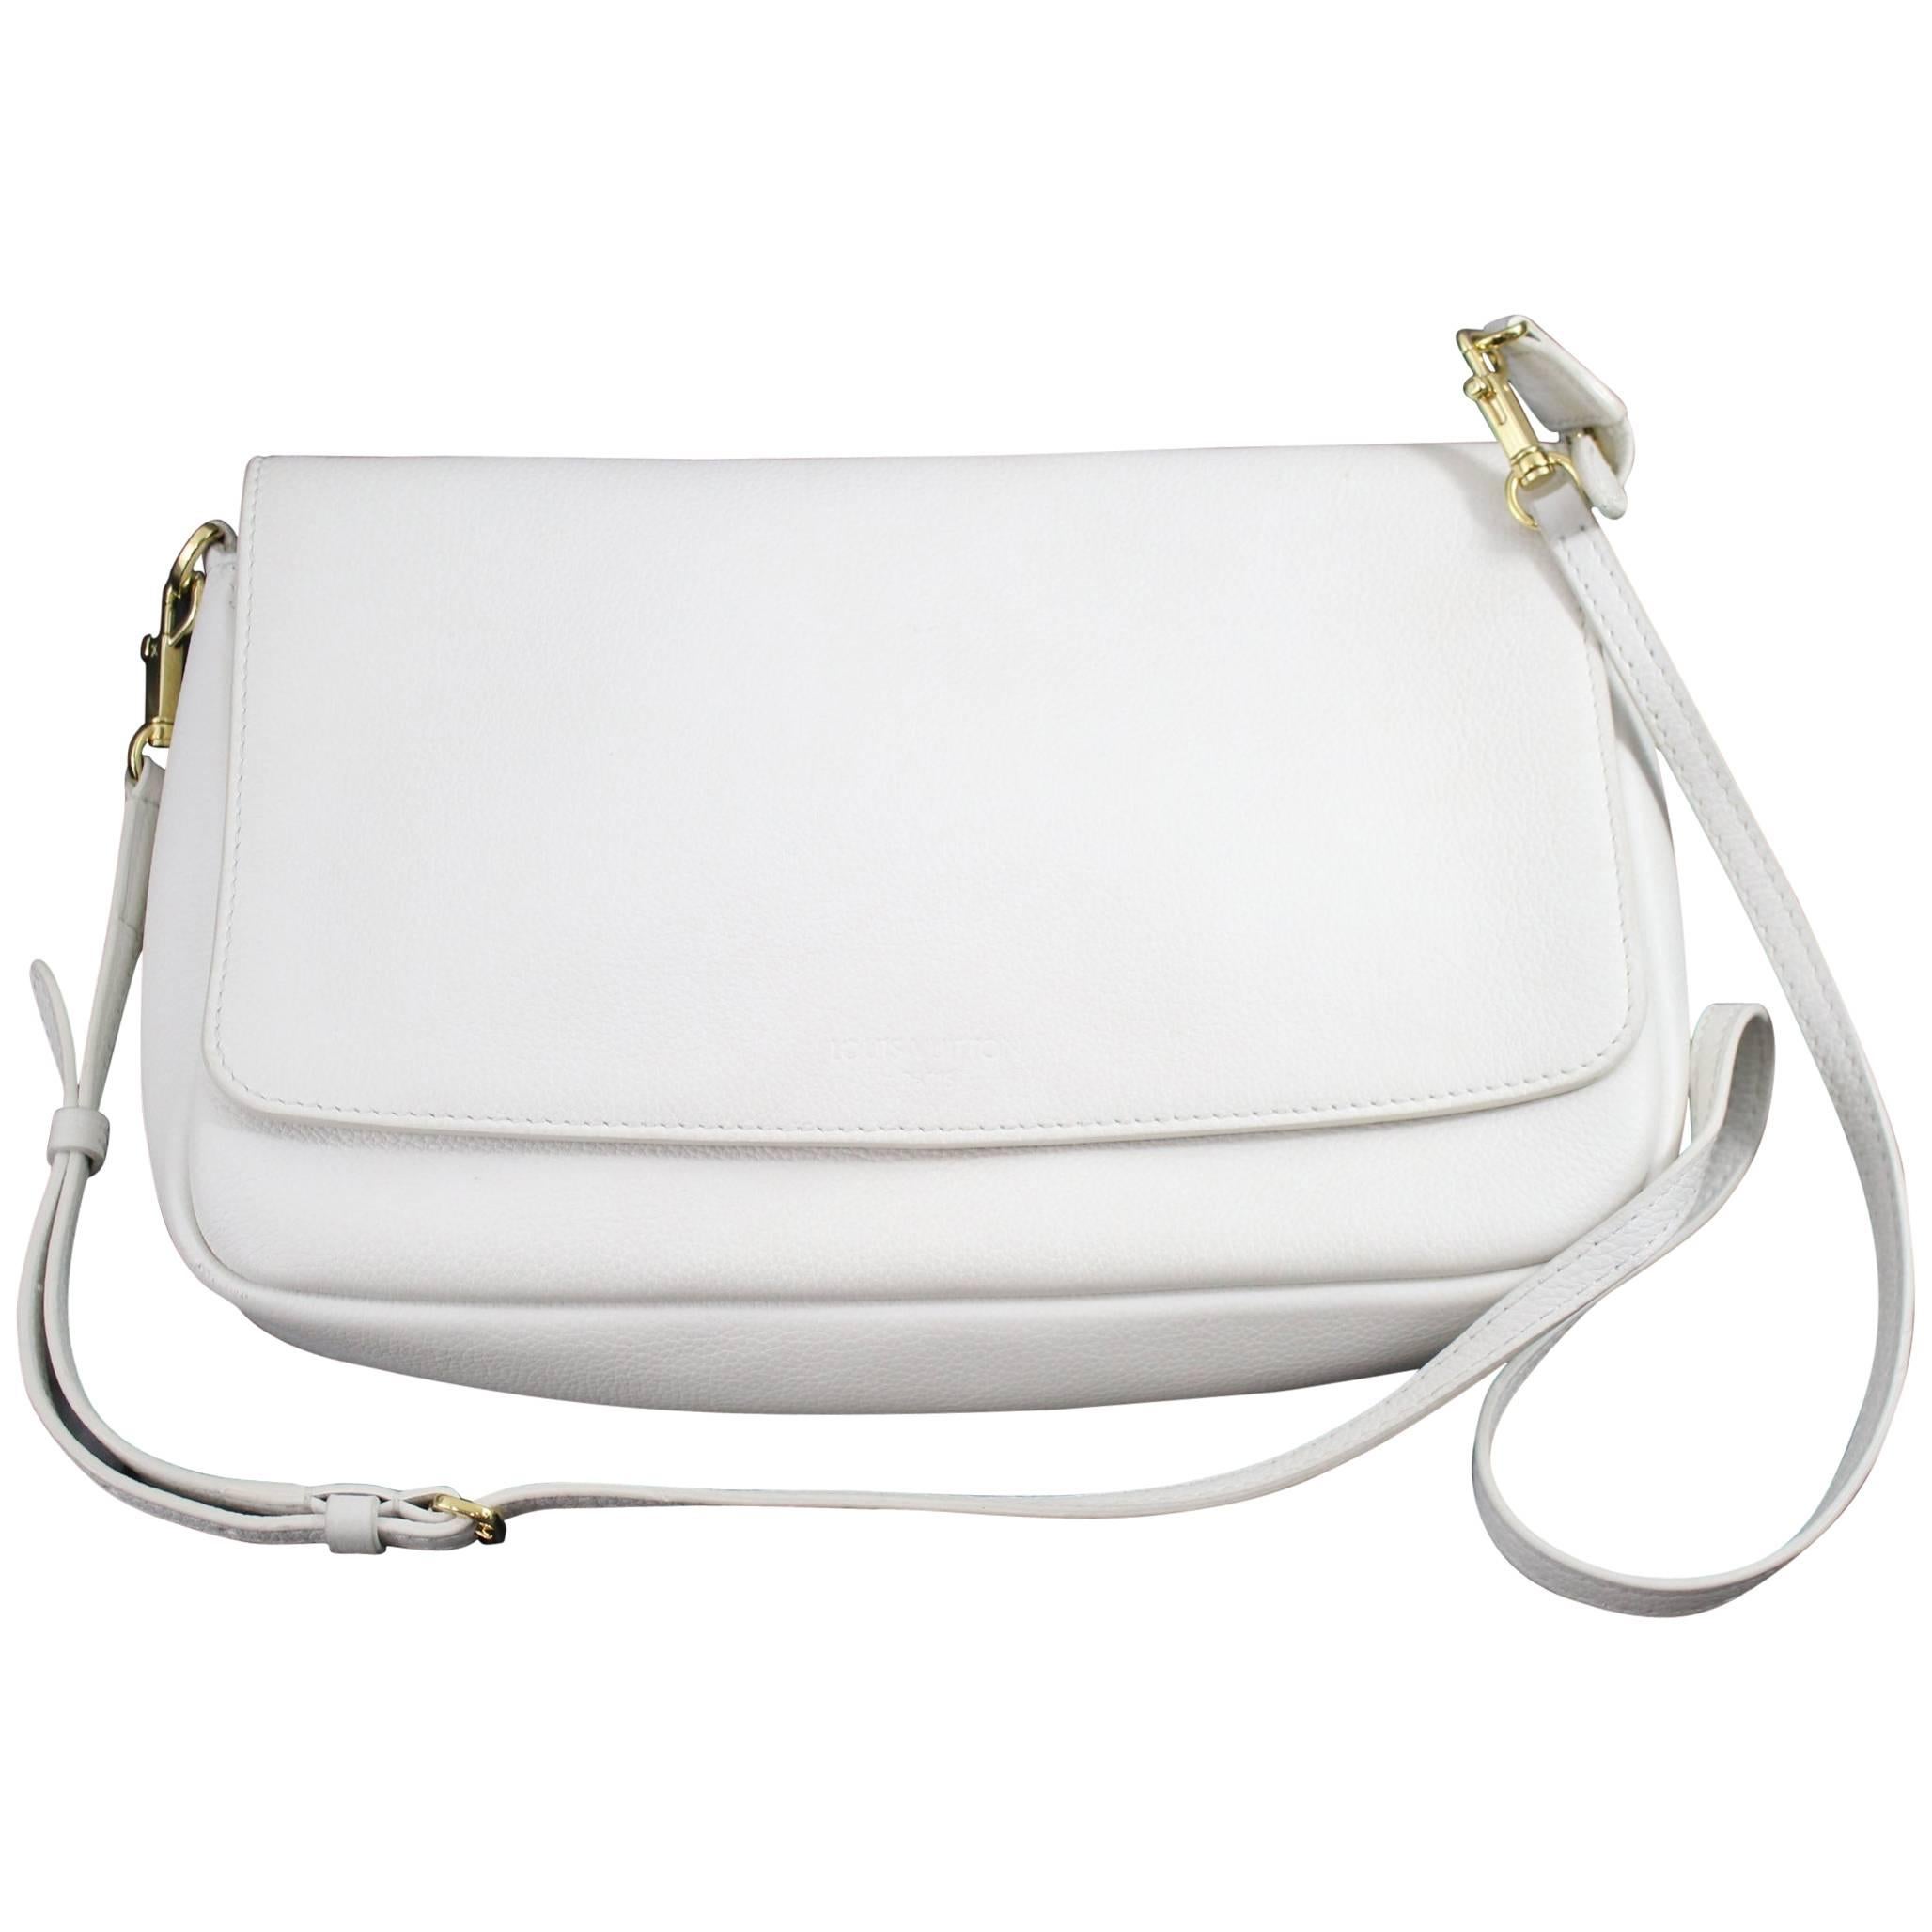 Louis Vuitton 2014 Monaco Cruise Collection White Grained Leather Bag For Sale